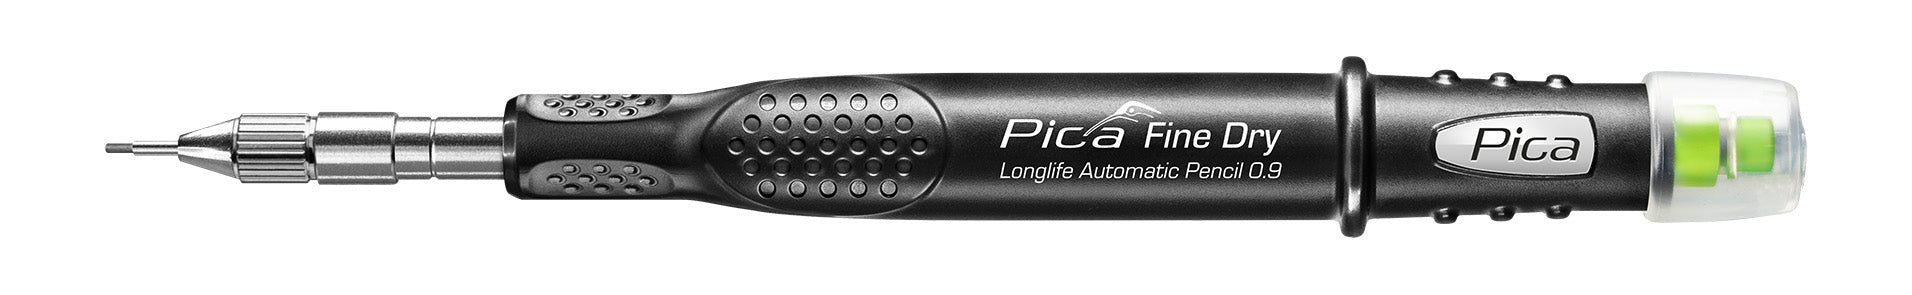 Pica Fine Dry Longlife Automatic Pencil 0.9mm